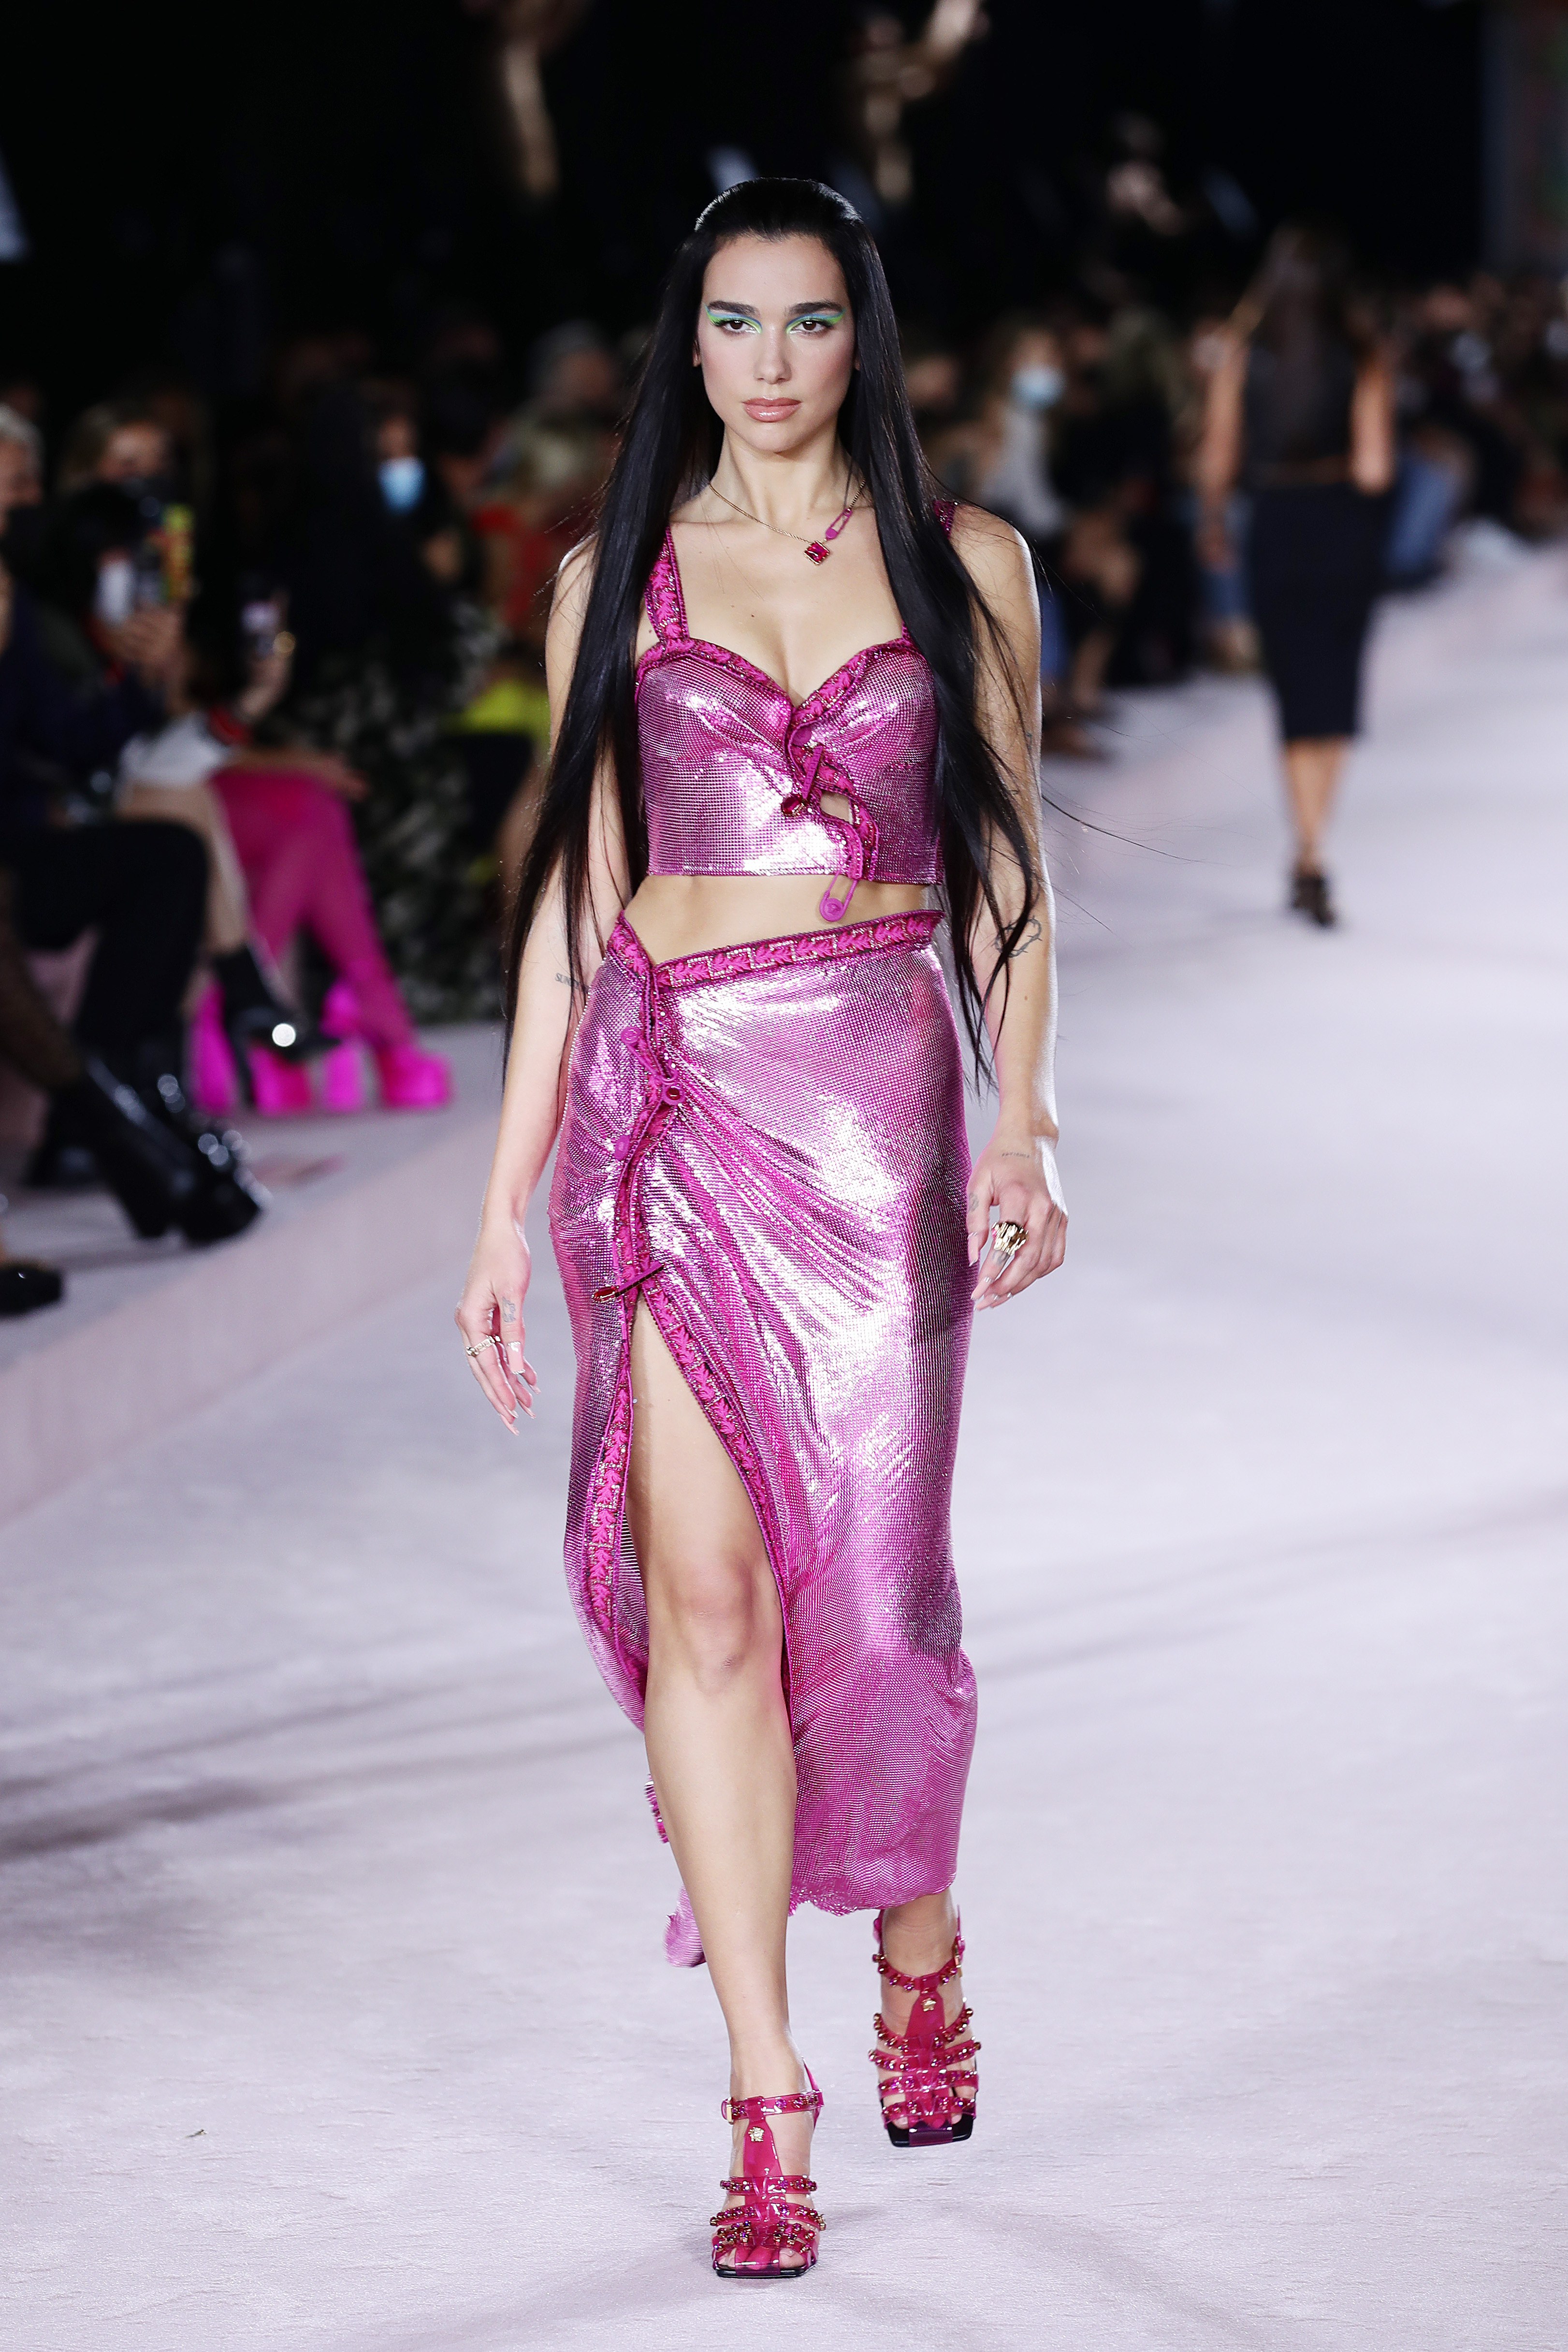 VERSACE on X: The past made present. A design created with an